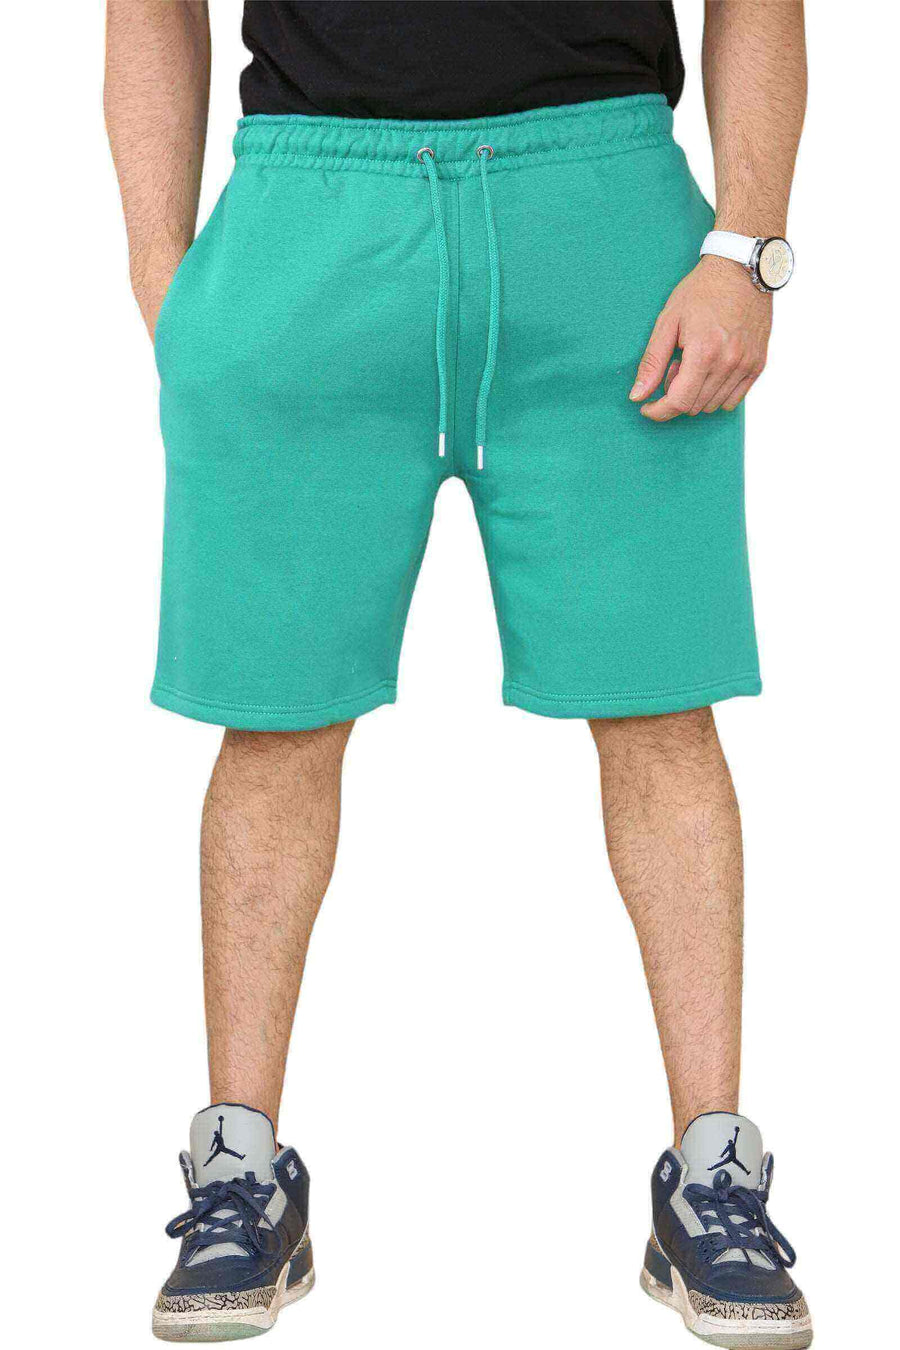 front Pose of Men's Gym Shorts in Sage for Your Active Lifestyle